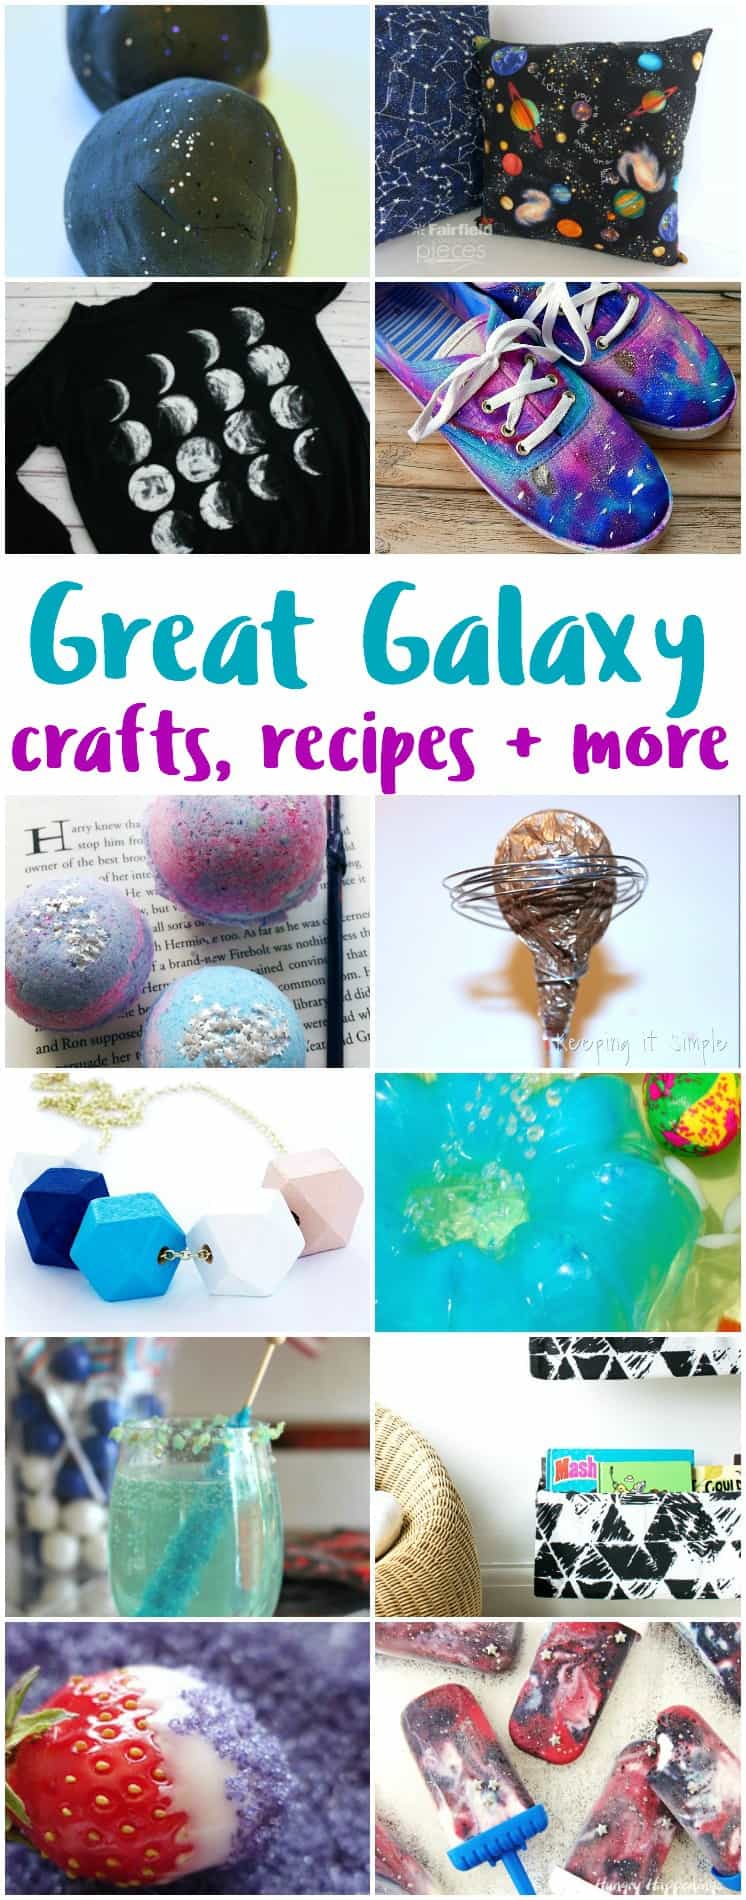 galaxy crafts recipes and other DIY space projects and tutorials